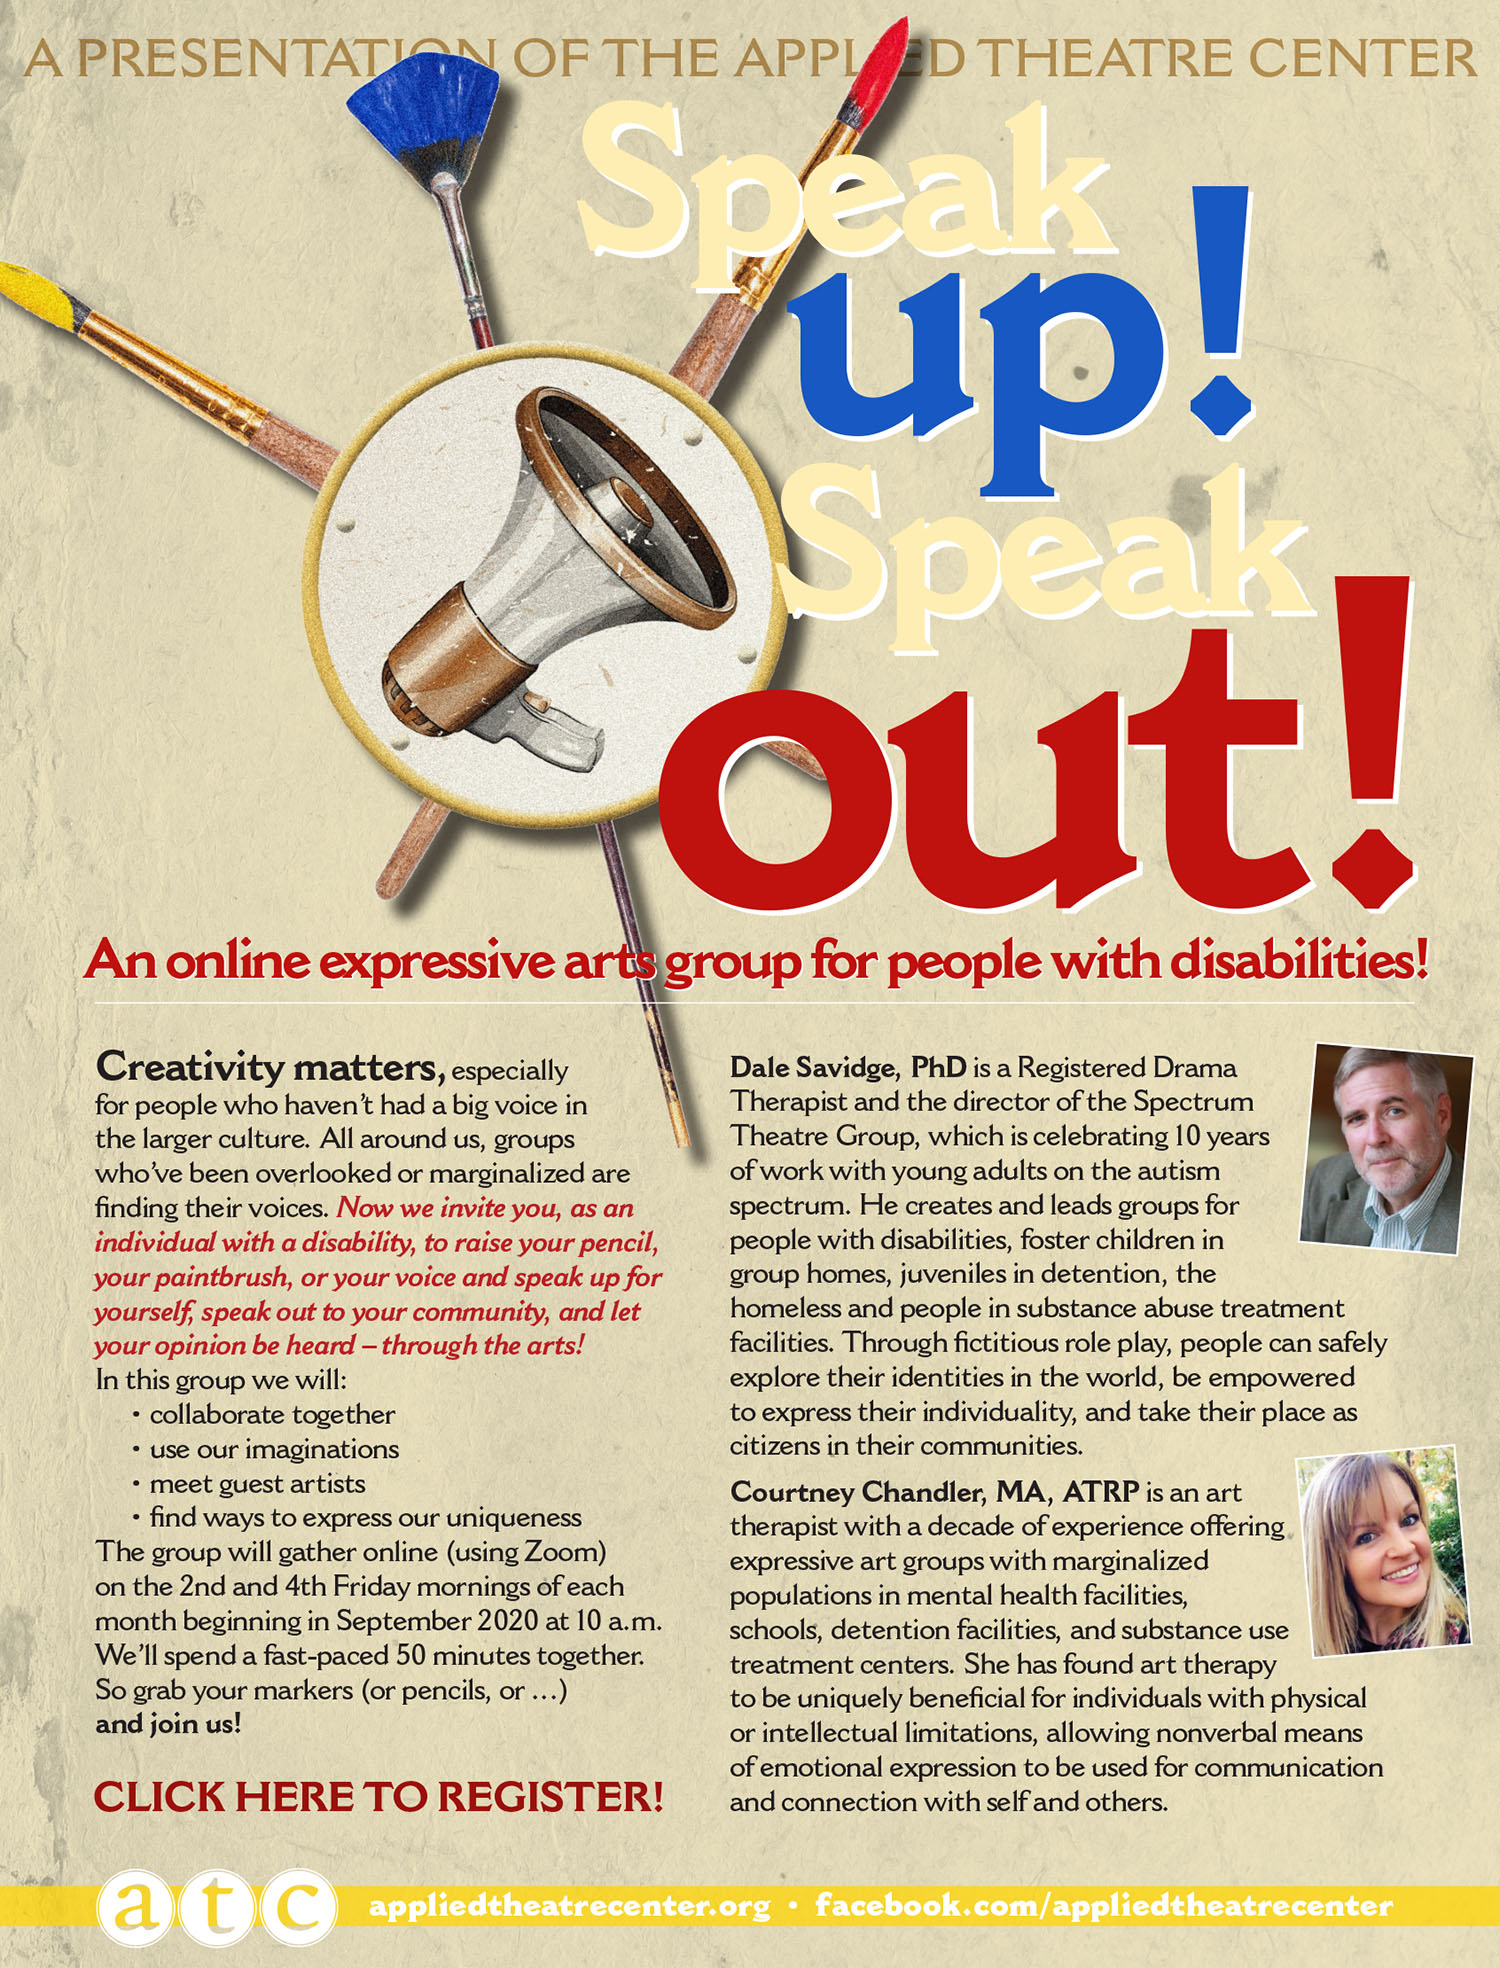 Speak Out! Speak Up! is an online group for adults with disabilities who want to find their voice and express themselves through the arts.